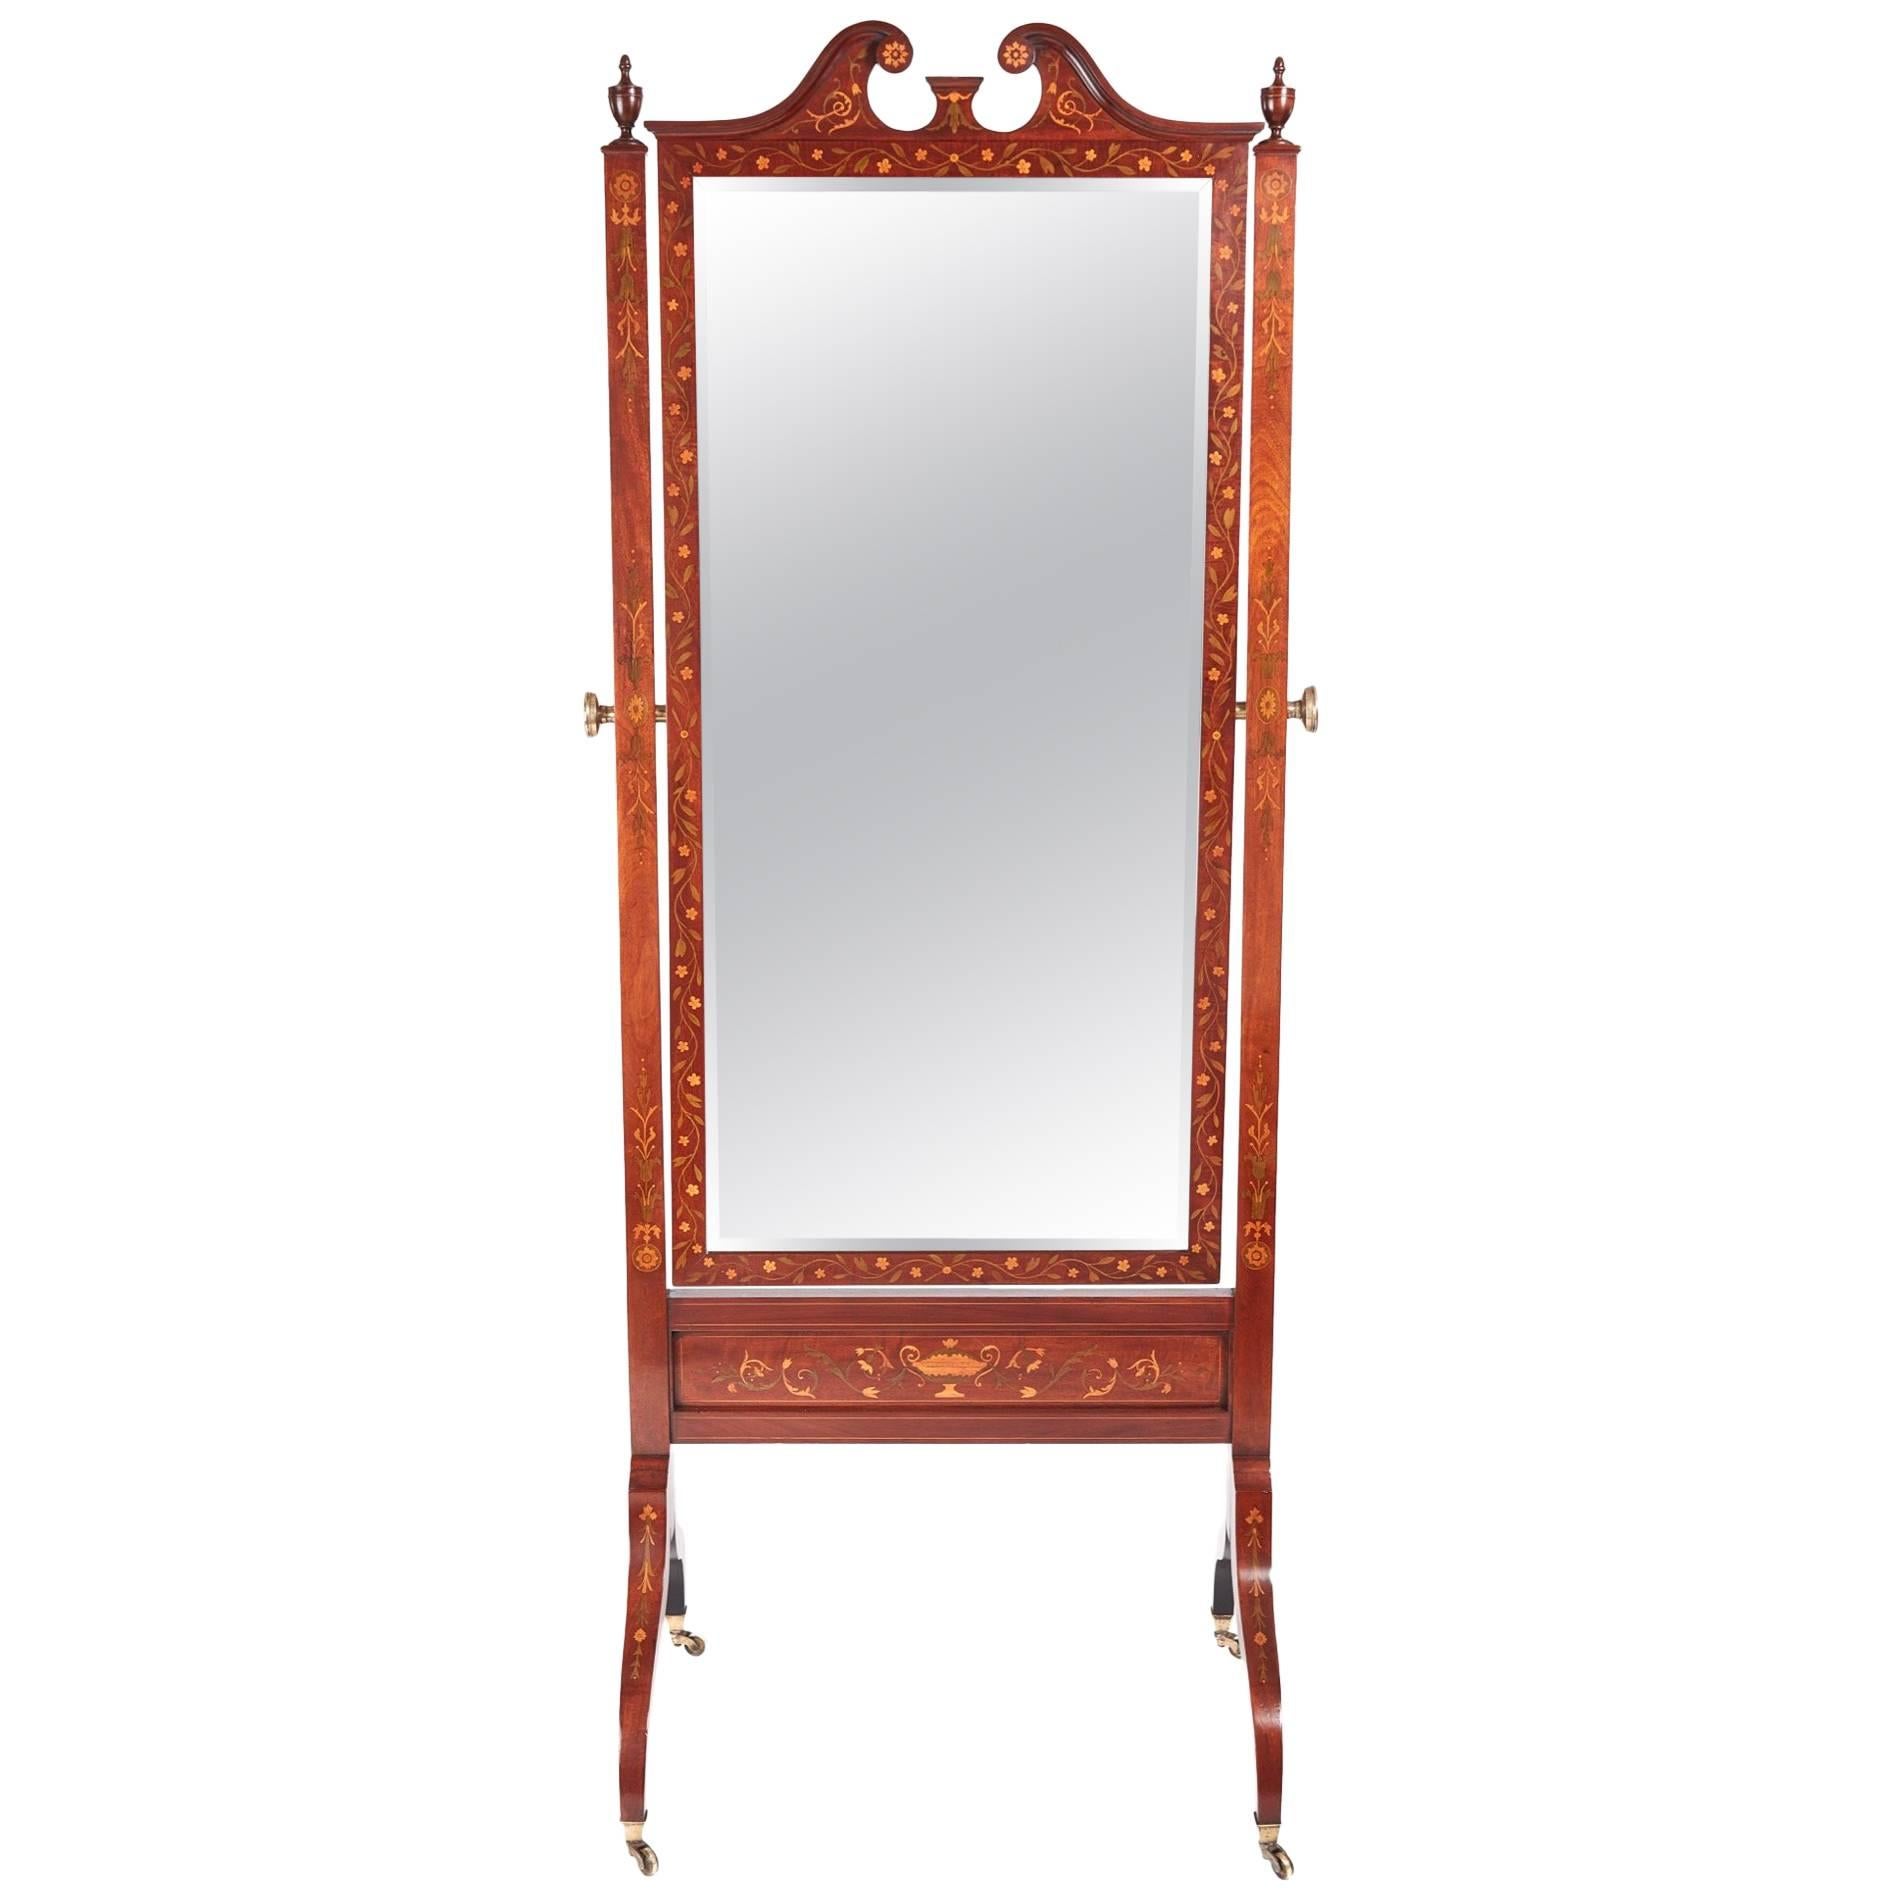 Outstanding Antique Mahogany Inlaid Cheval Mirror For Sale